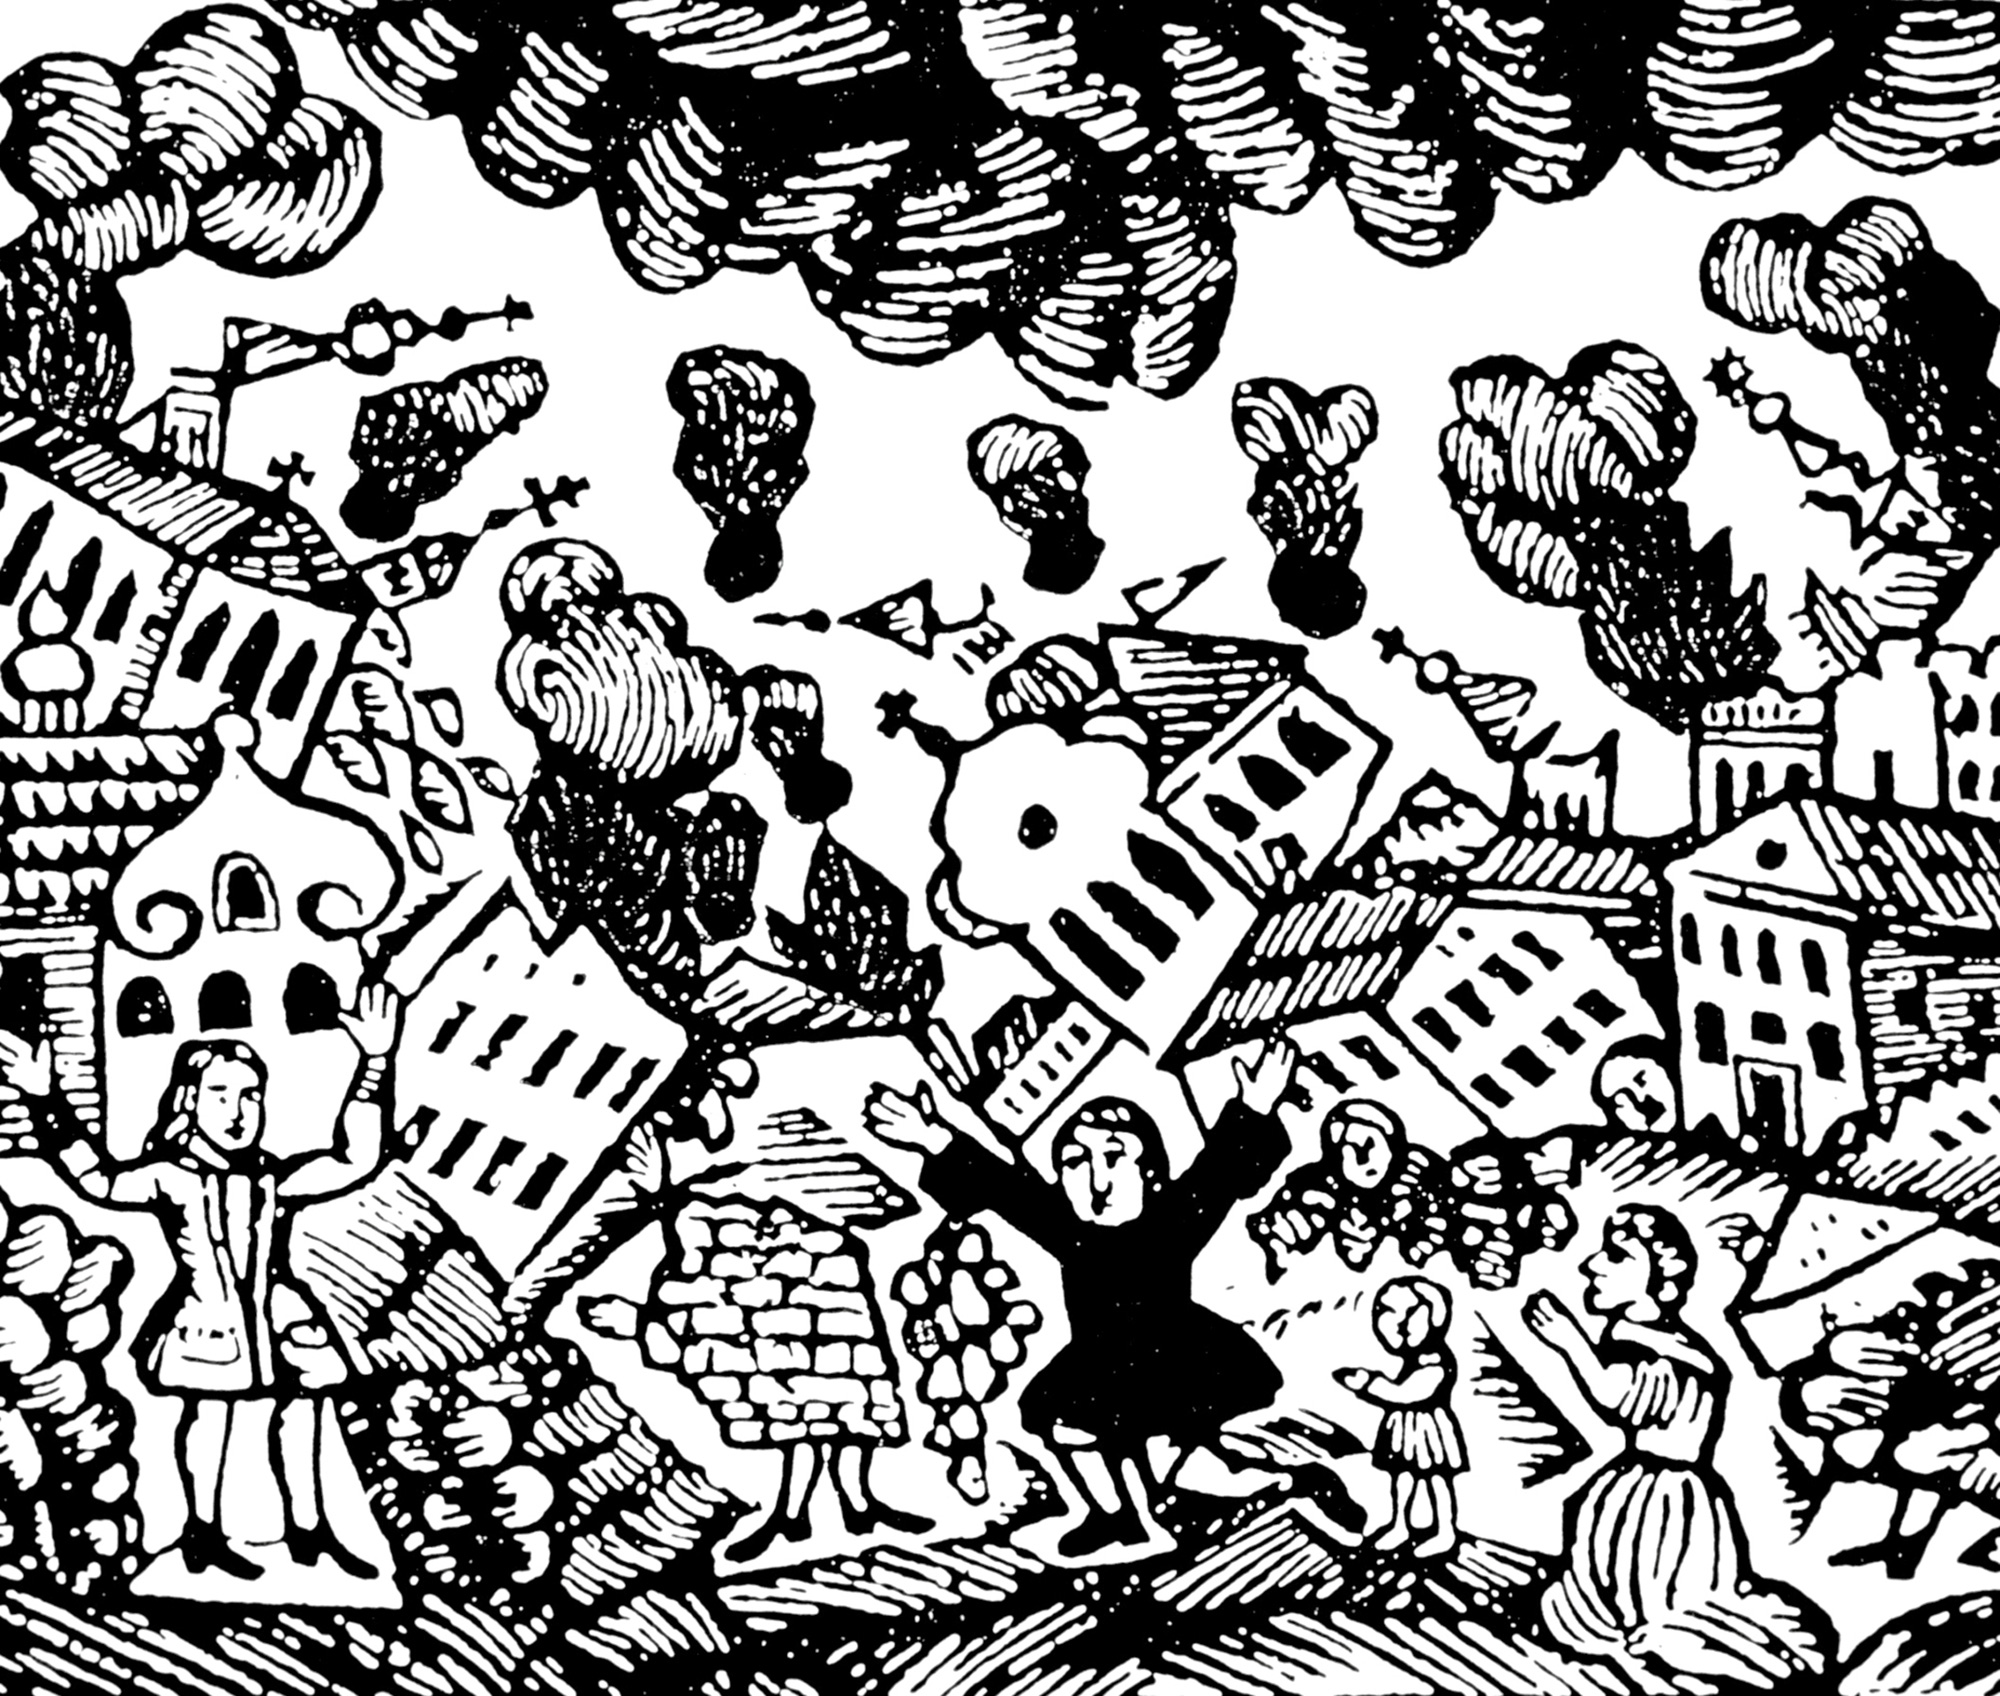 1755 woodcut from broadside printed in Litomysl, Bohemia, depicting the Lisbon earthquake. Note that the cityscape bears no resemblance to the Portuguese capital.